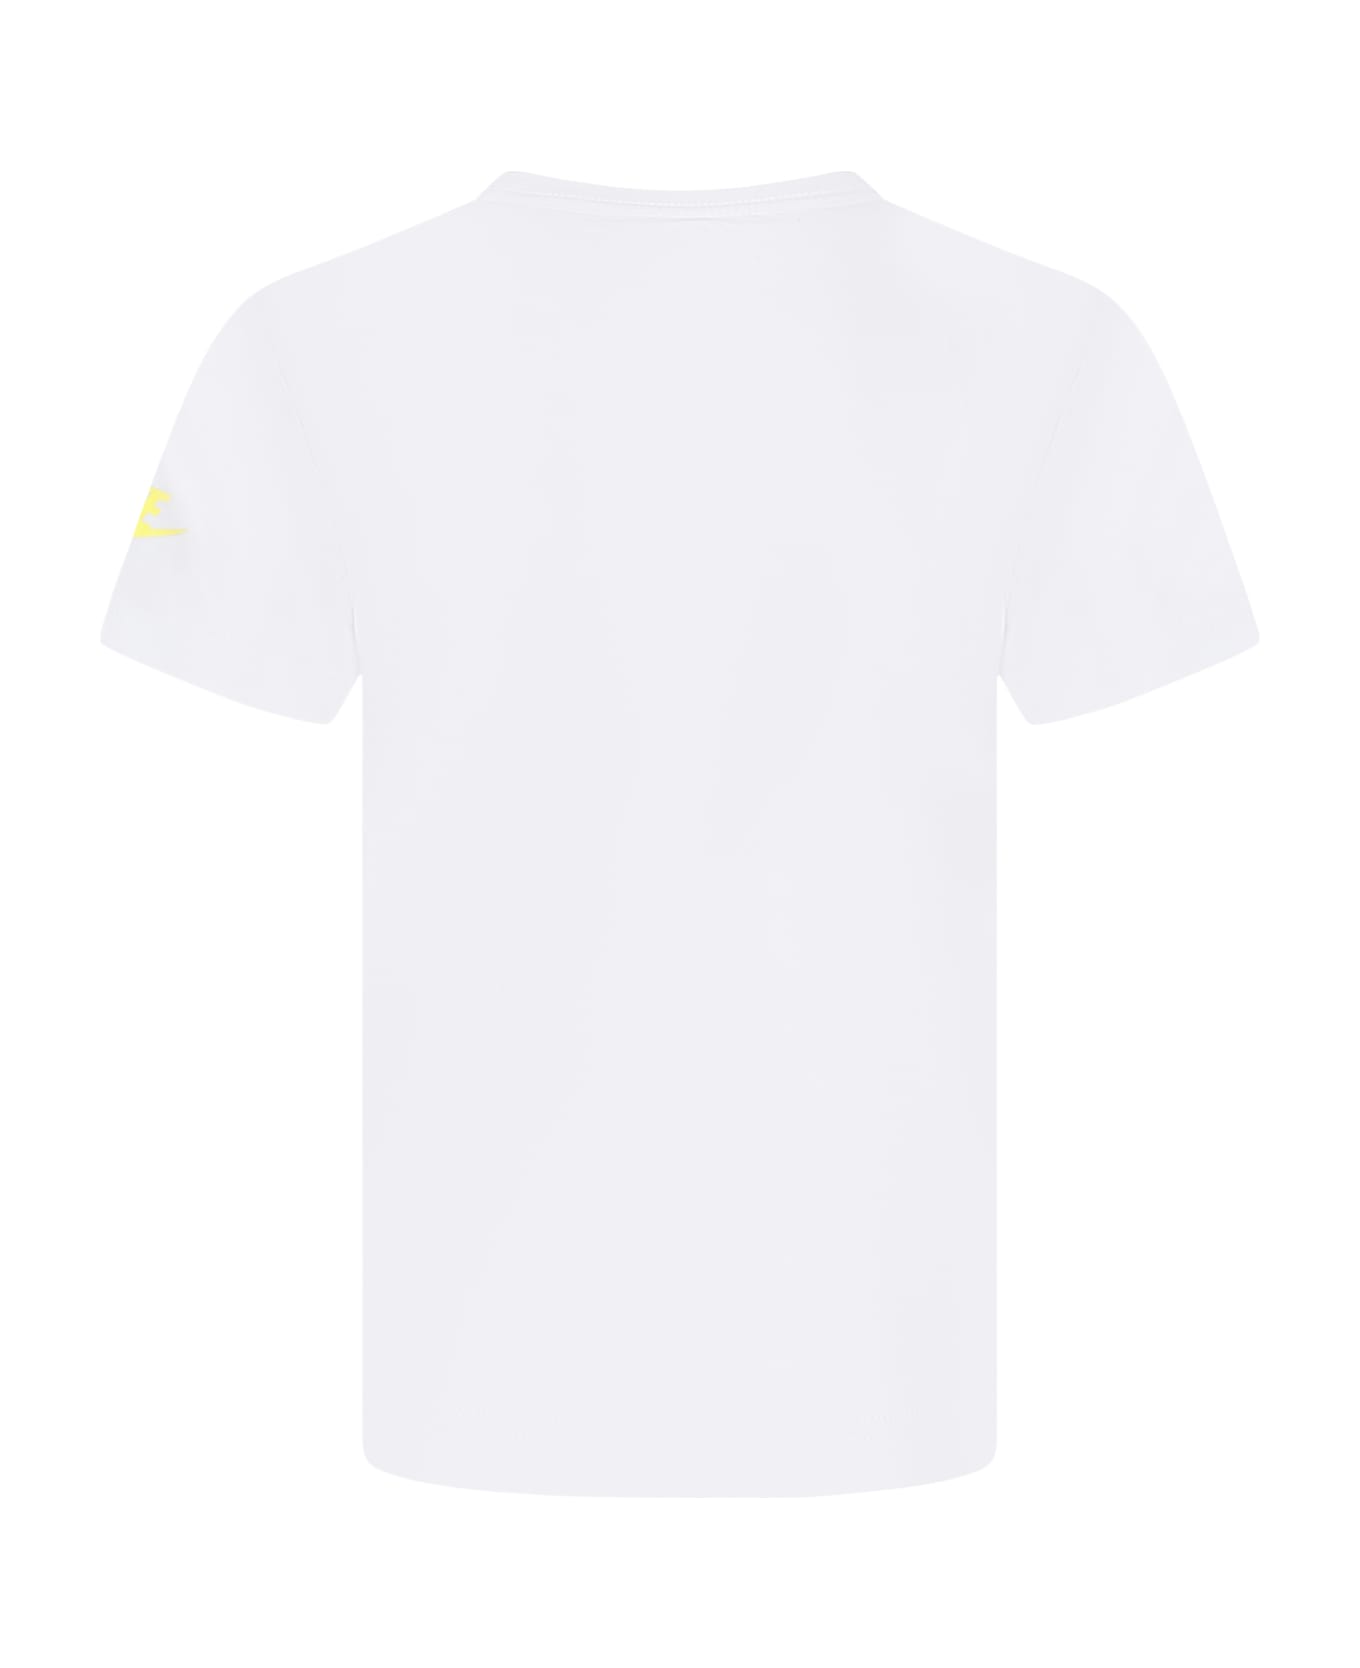 Nike White T-shirt For Boy With Logo And "just Do It" Writing - White